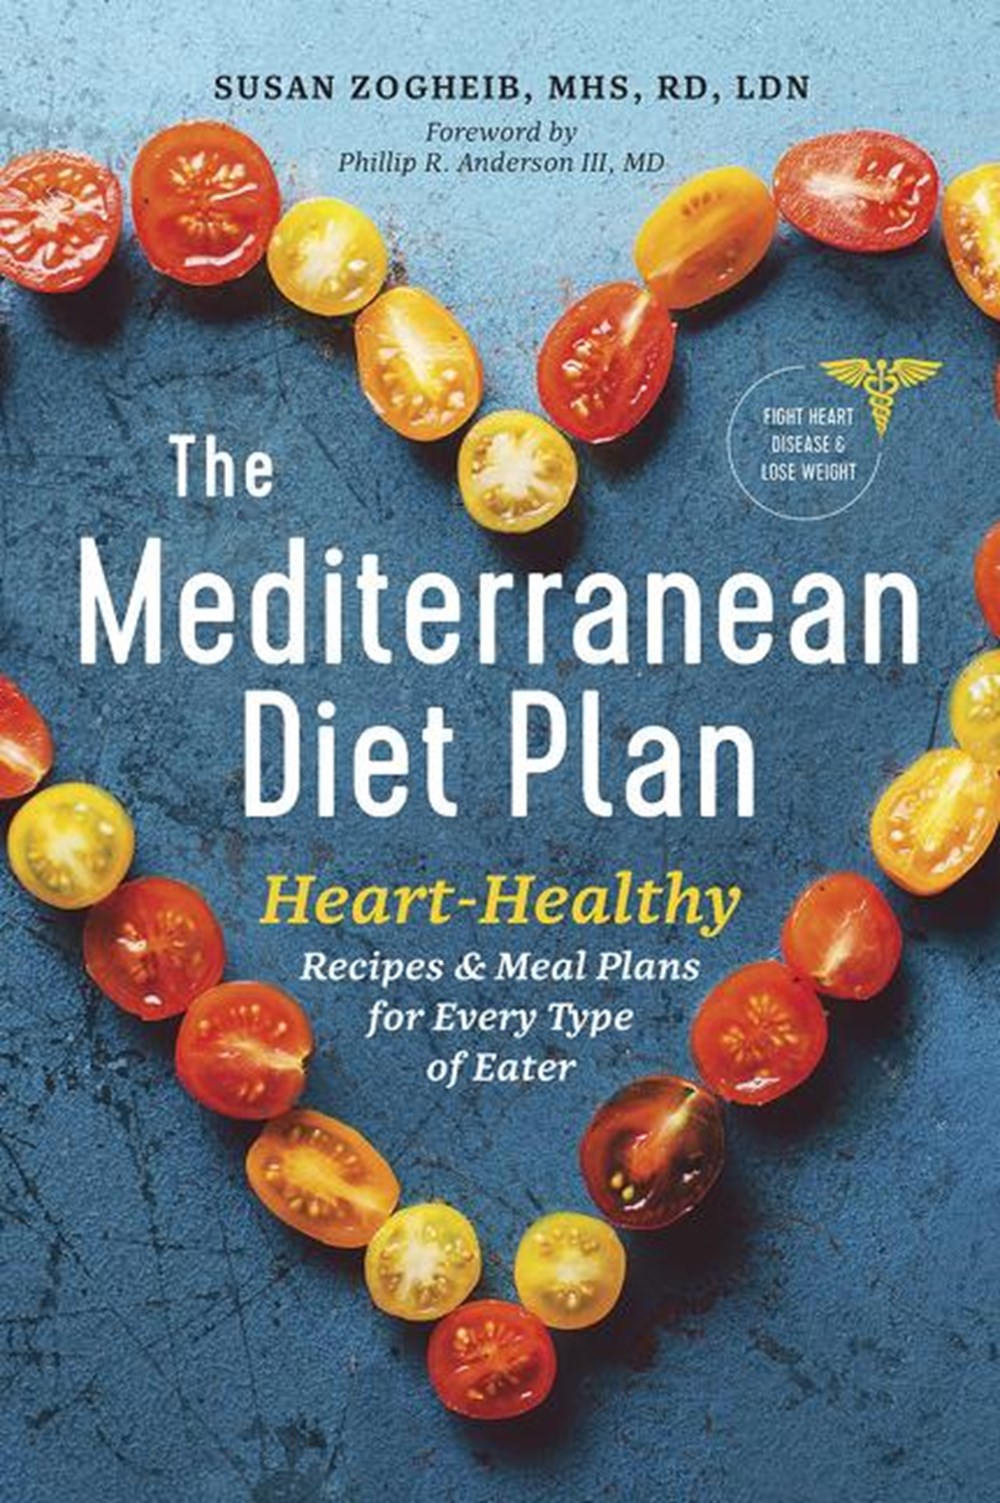 Mediterranean Diet Plan: Heart-Healthy Recipes & Meal Plans for Every Type of Eater